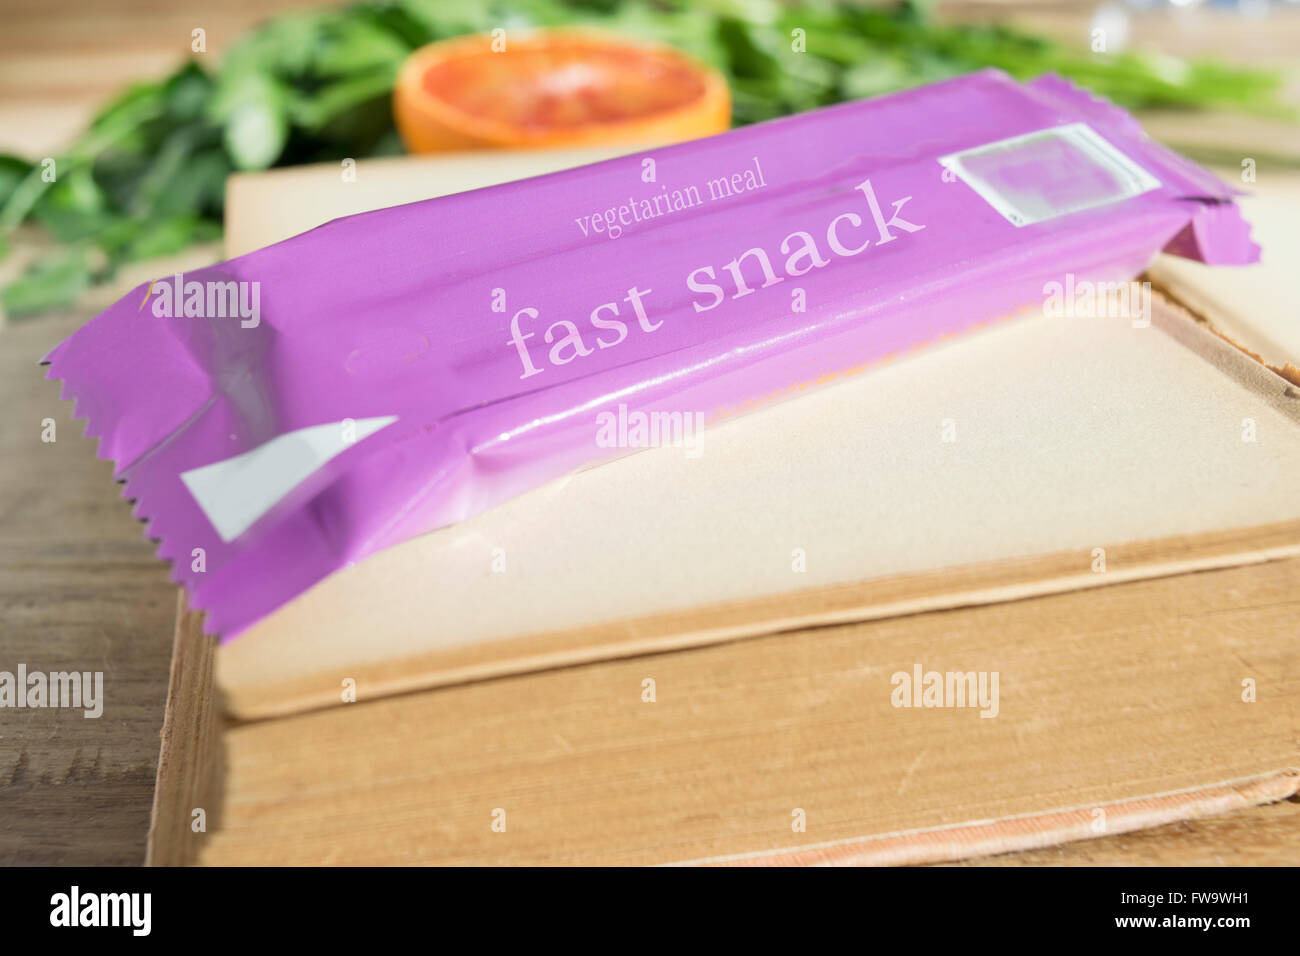 bar of vegetarian meal for a fast and healthy brunch Stock Photo